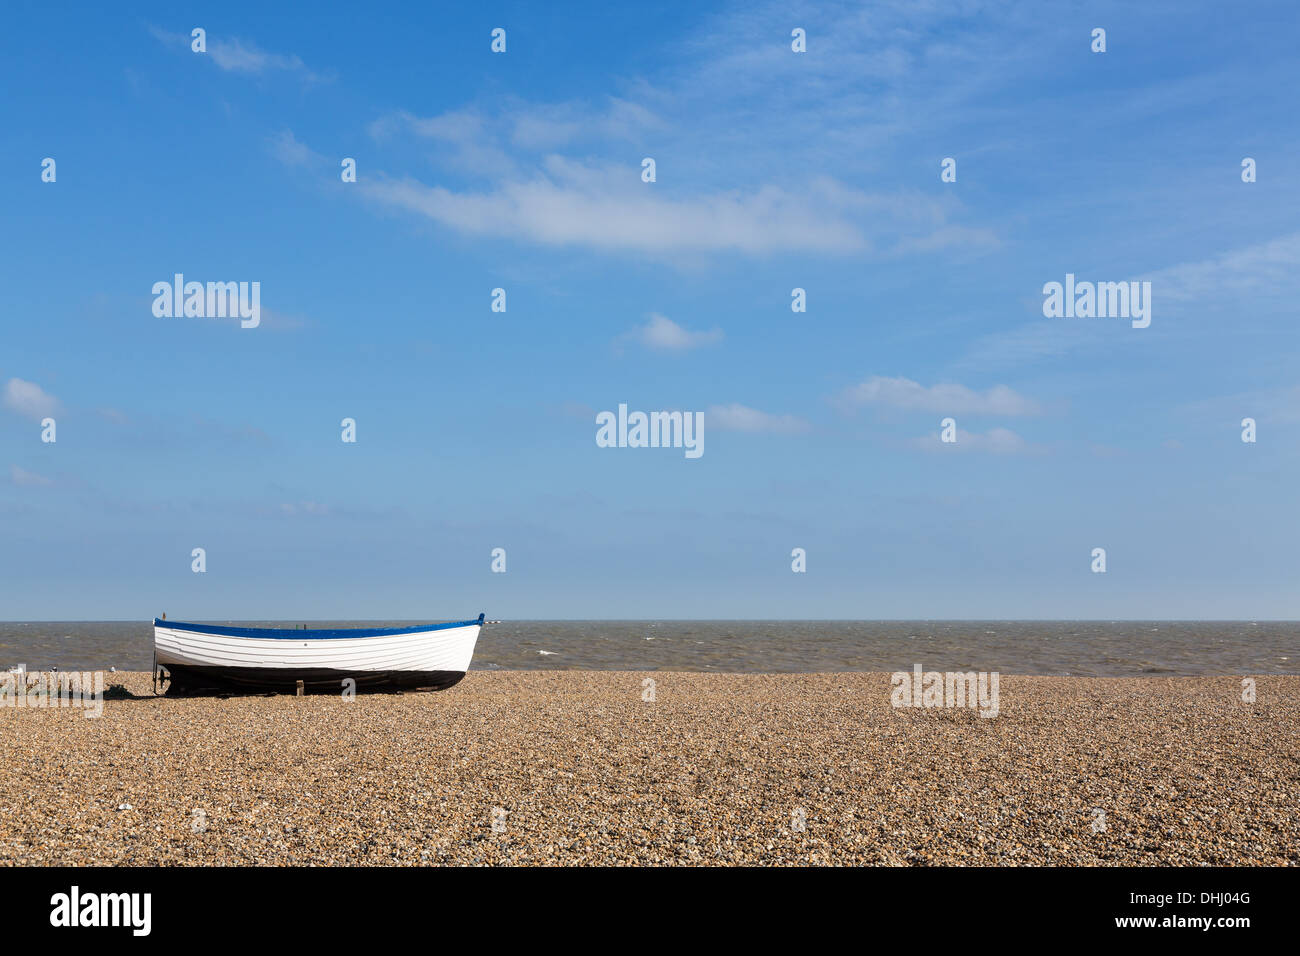 Aldeburgh beach in Suffolk, East coast of England, Uk with old wooden boat on the shingle Stock Photo